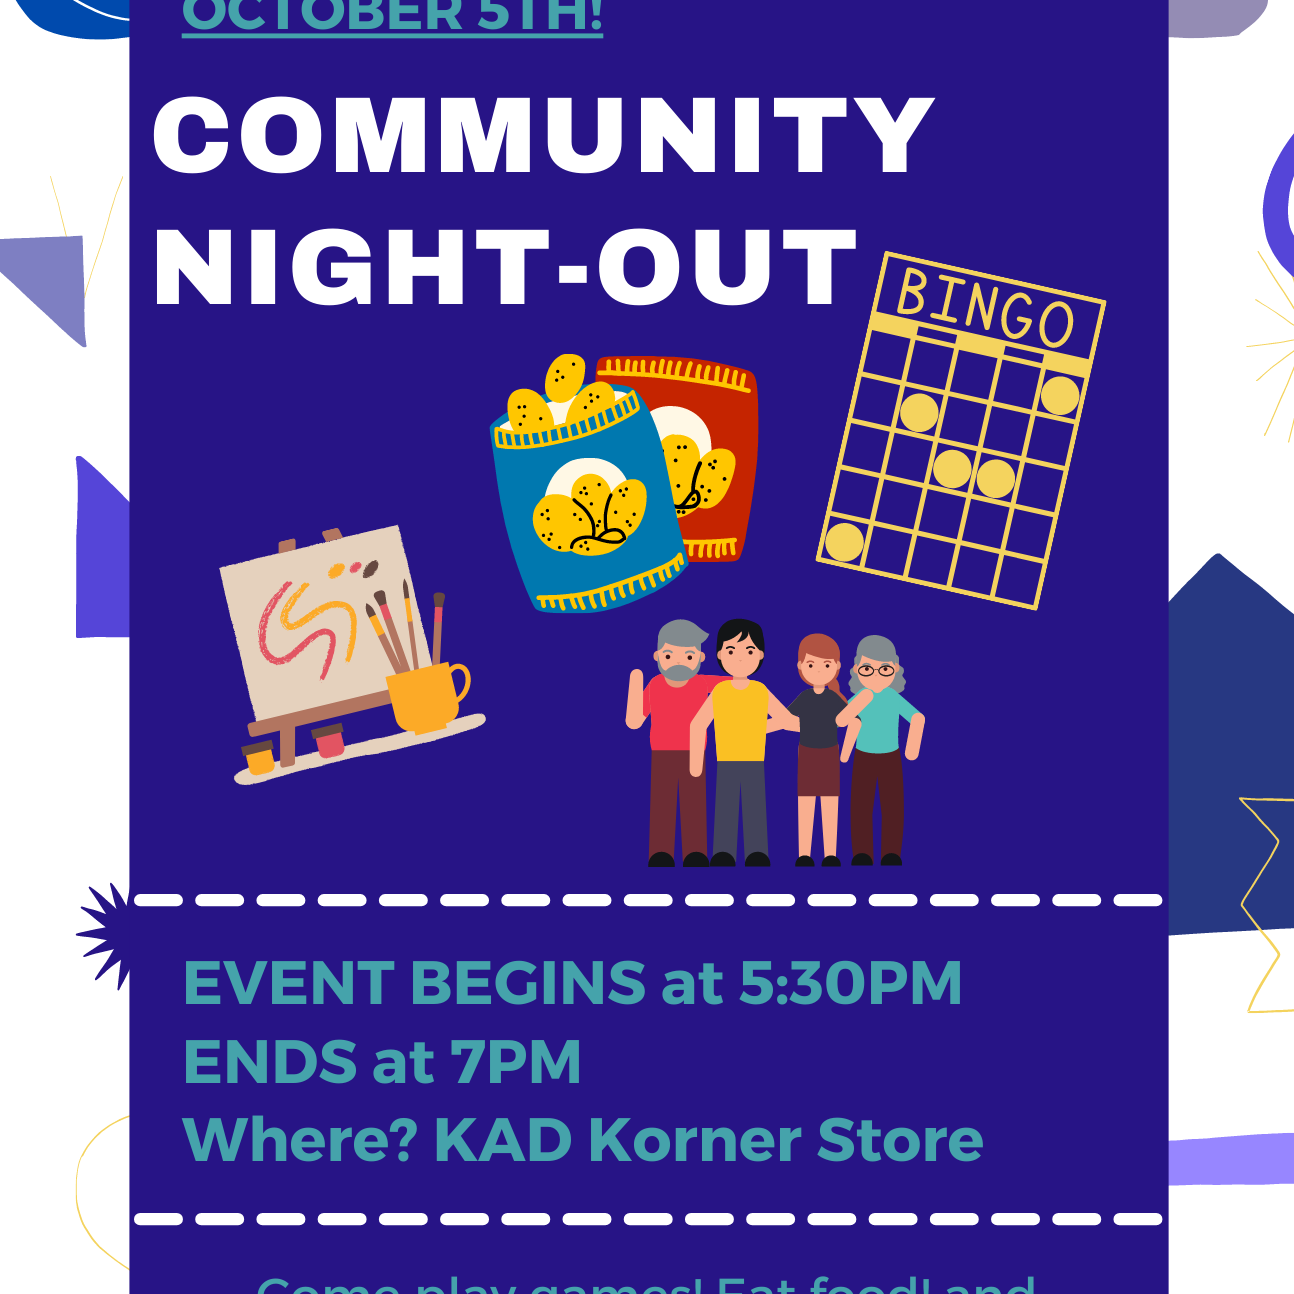 Image: drawings of an easel with paintbrushes, bags of potato chips, a bingo card, and a group of young and elderly people. Text: Come join us on October 5th! Community Night-Out. Event begins at 5:30pm. Ends at 7pm. Where? KAD Korner Store. Come play games! Eat food!